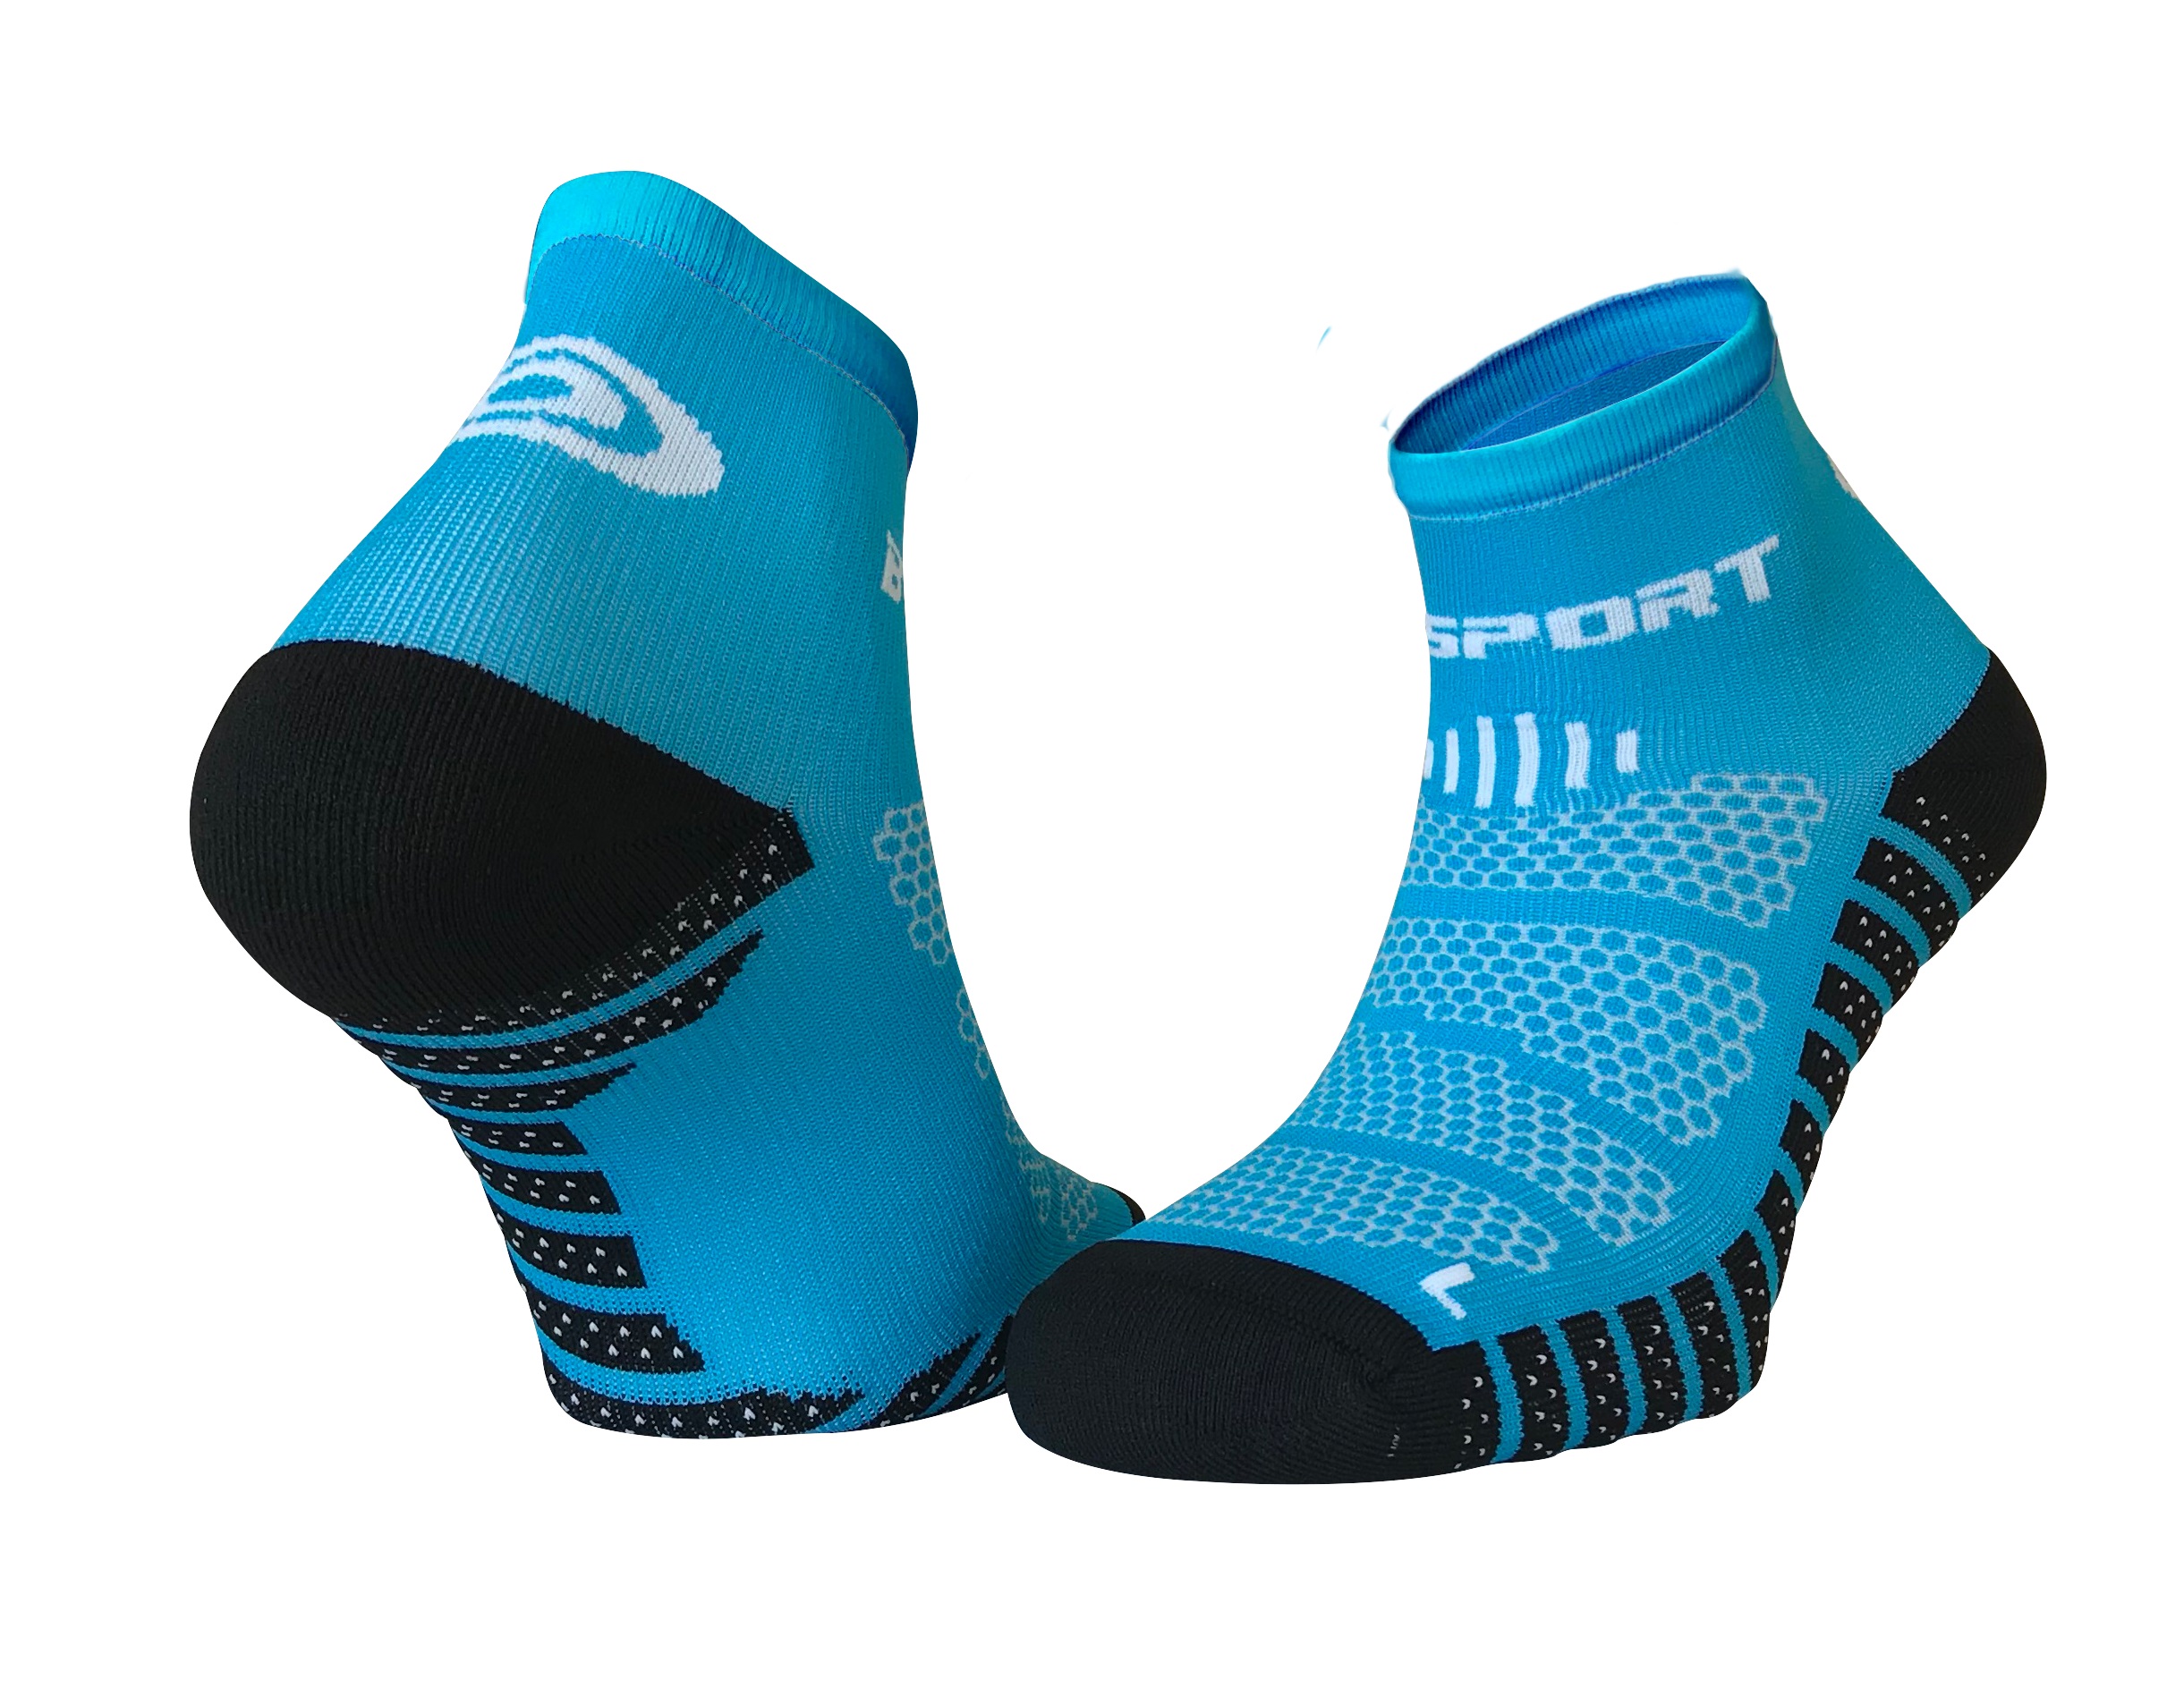 BV SPORT SOCQUETTES SCR ONE EVO BLEUES Chaussettes Running BV Sport